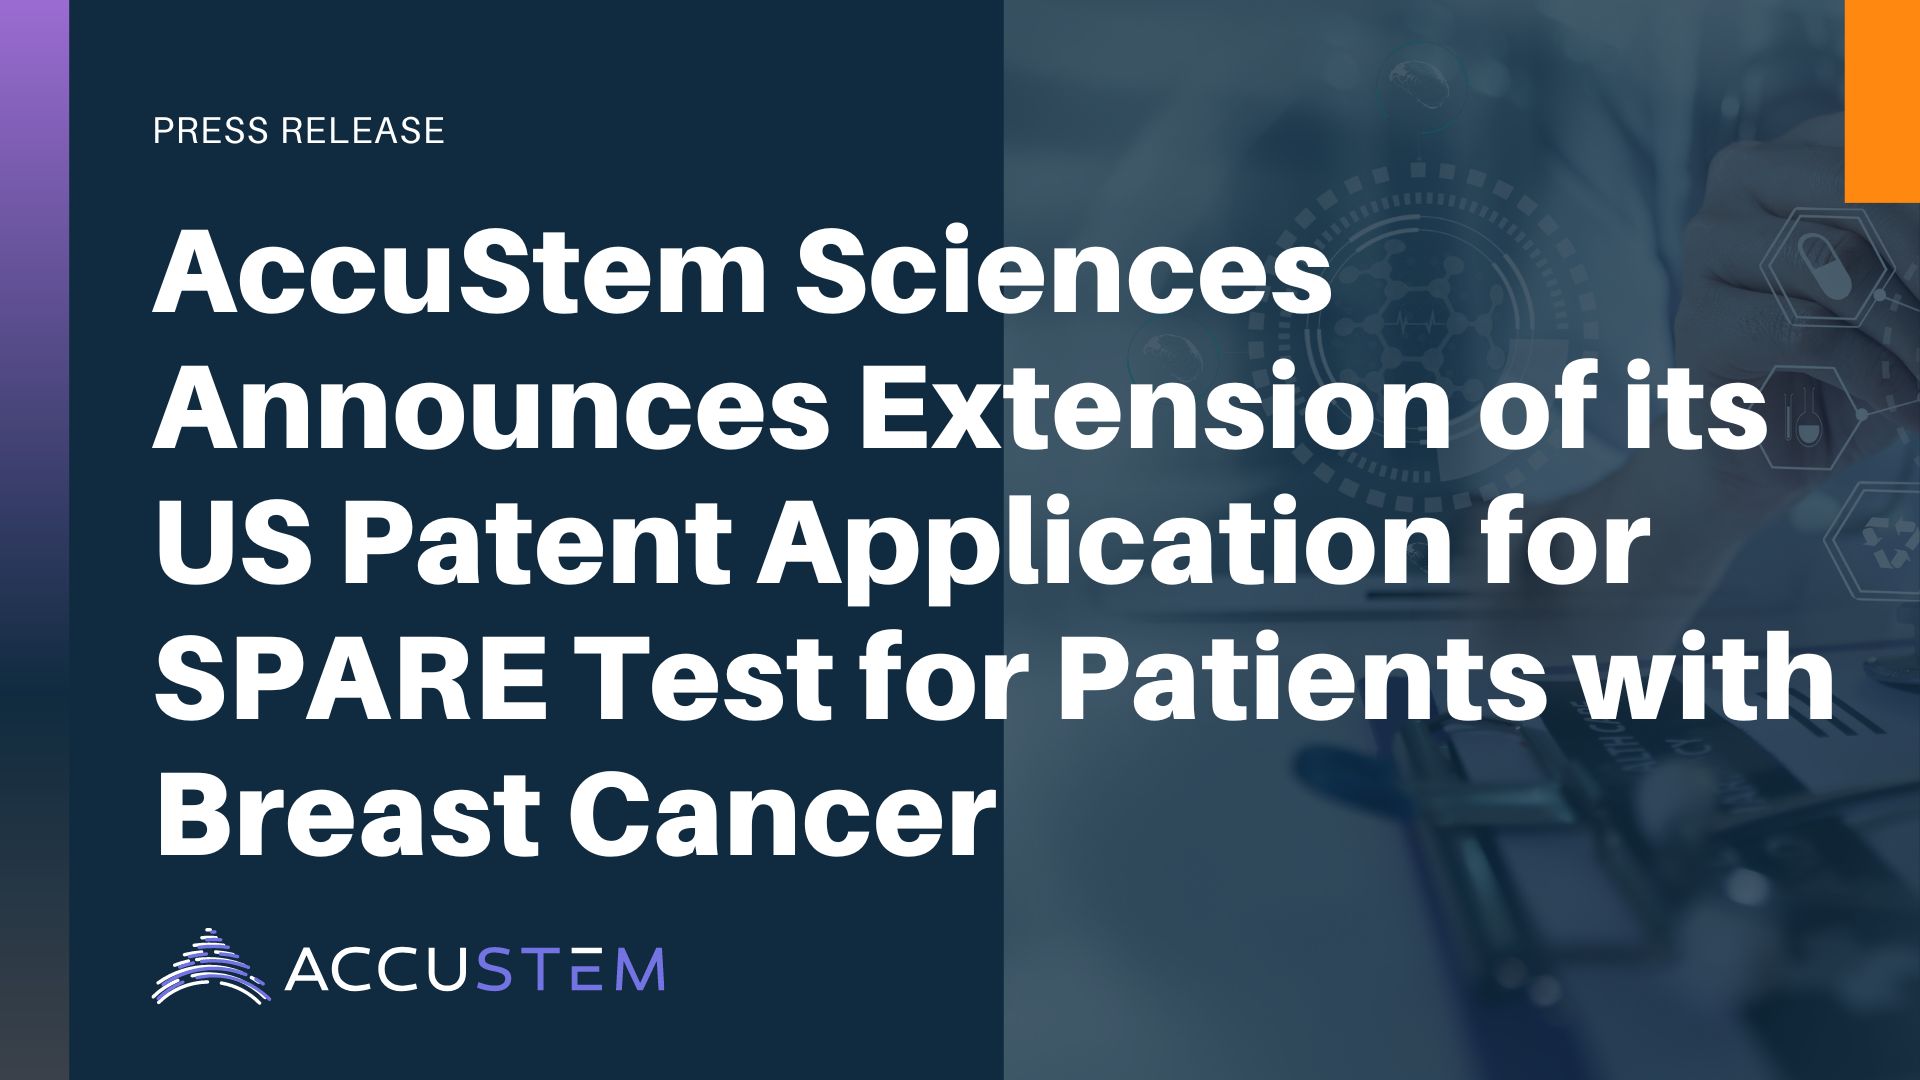 AccuStem Sciences Announces Extension of its US Patent Application for SPARE Test for Patients with Breast Cancer